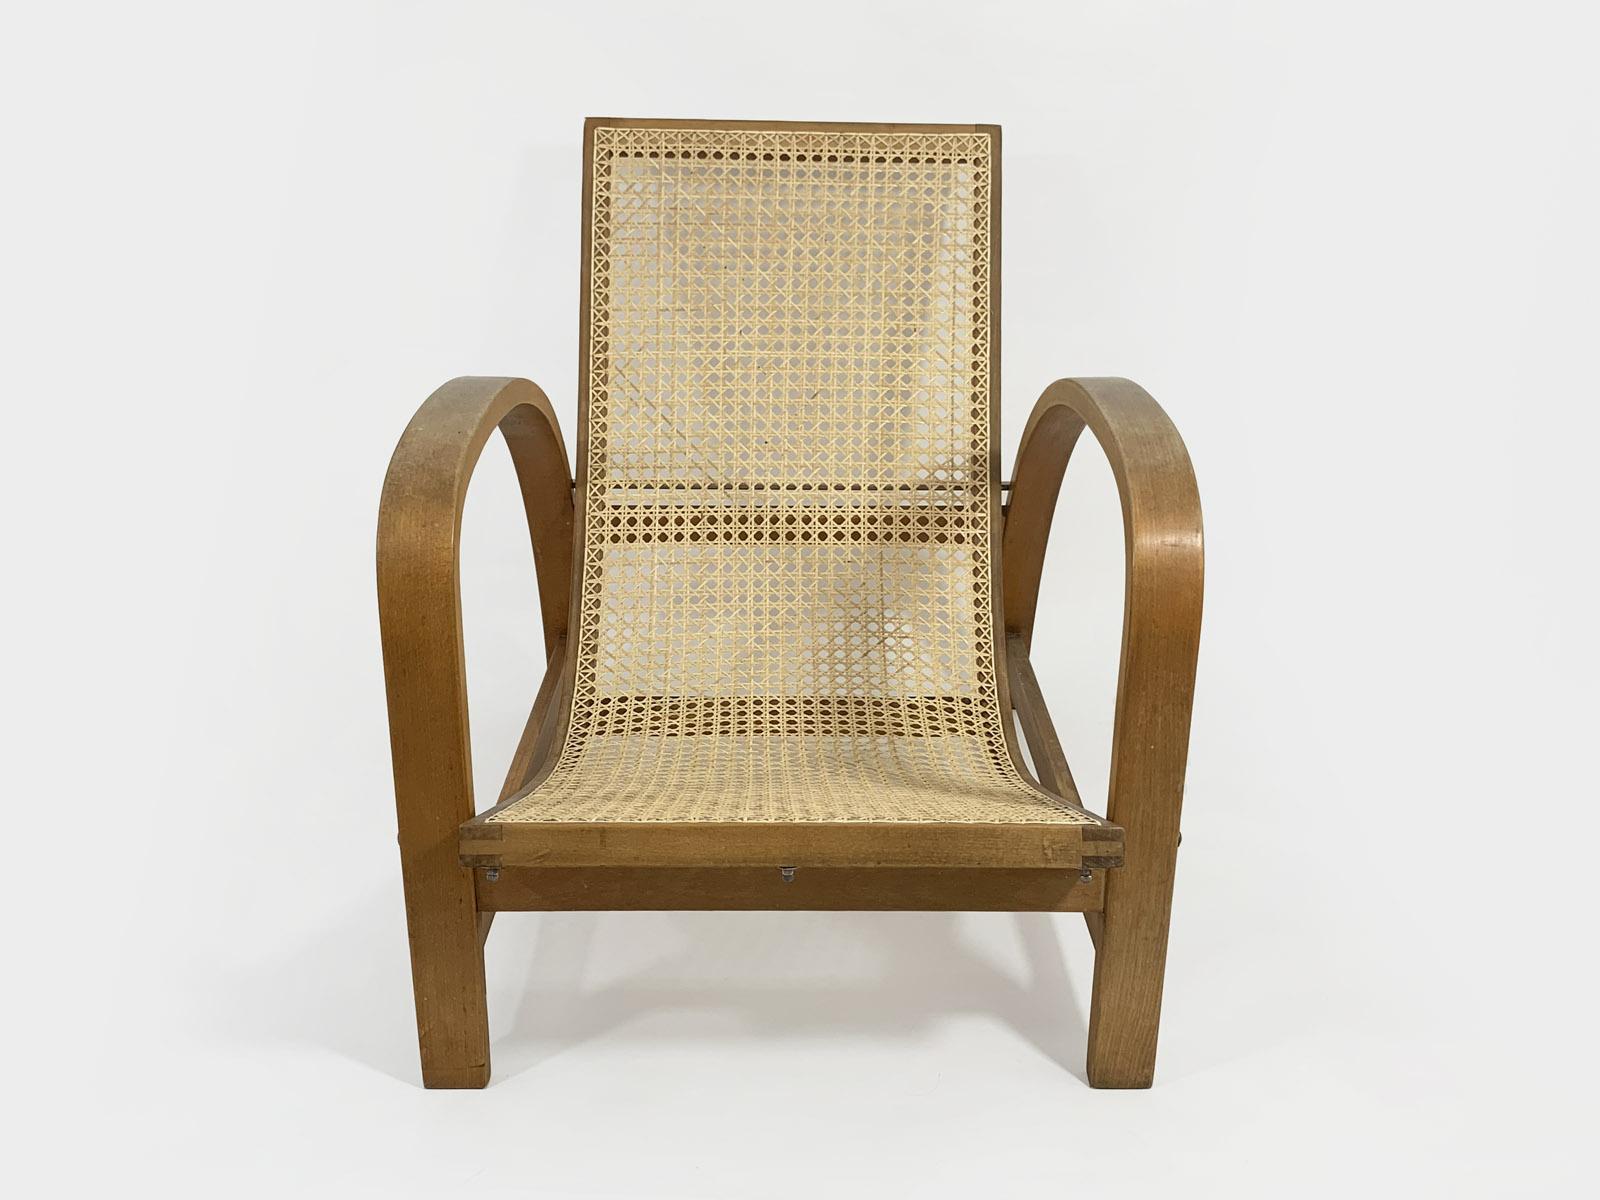 Other Jindrich Halabala Reclining Chair in Wood and Cane, 1930s For Sale